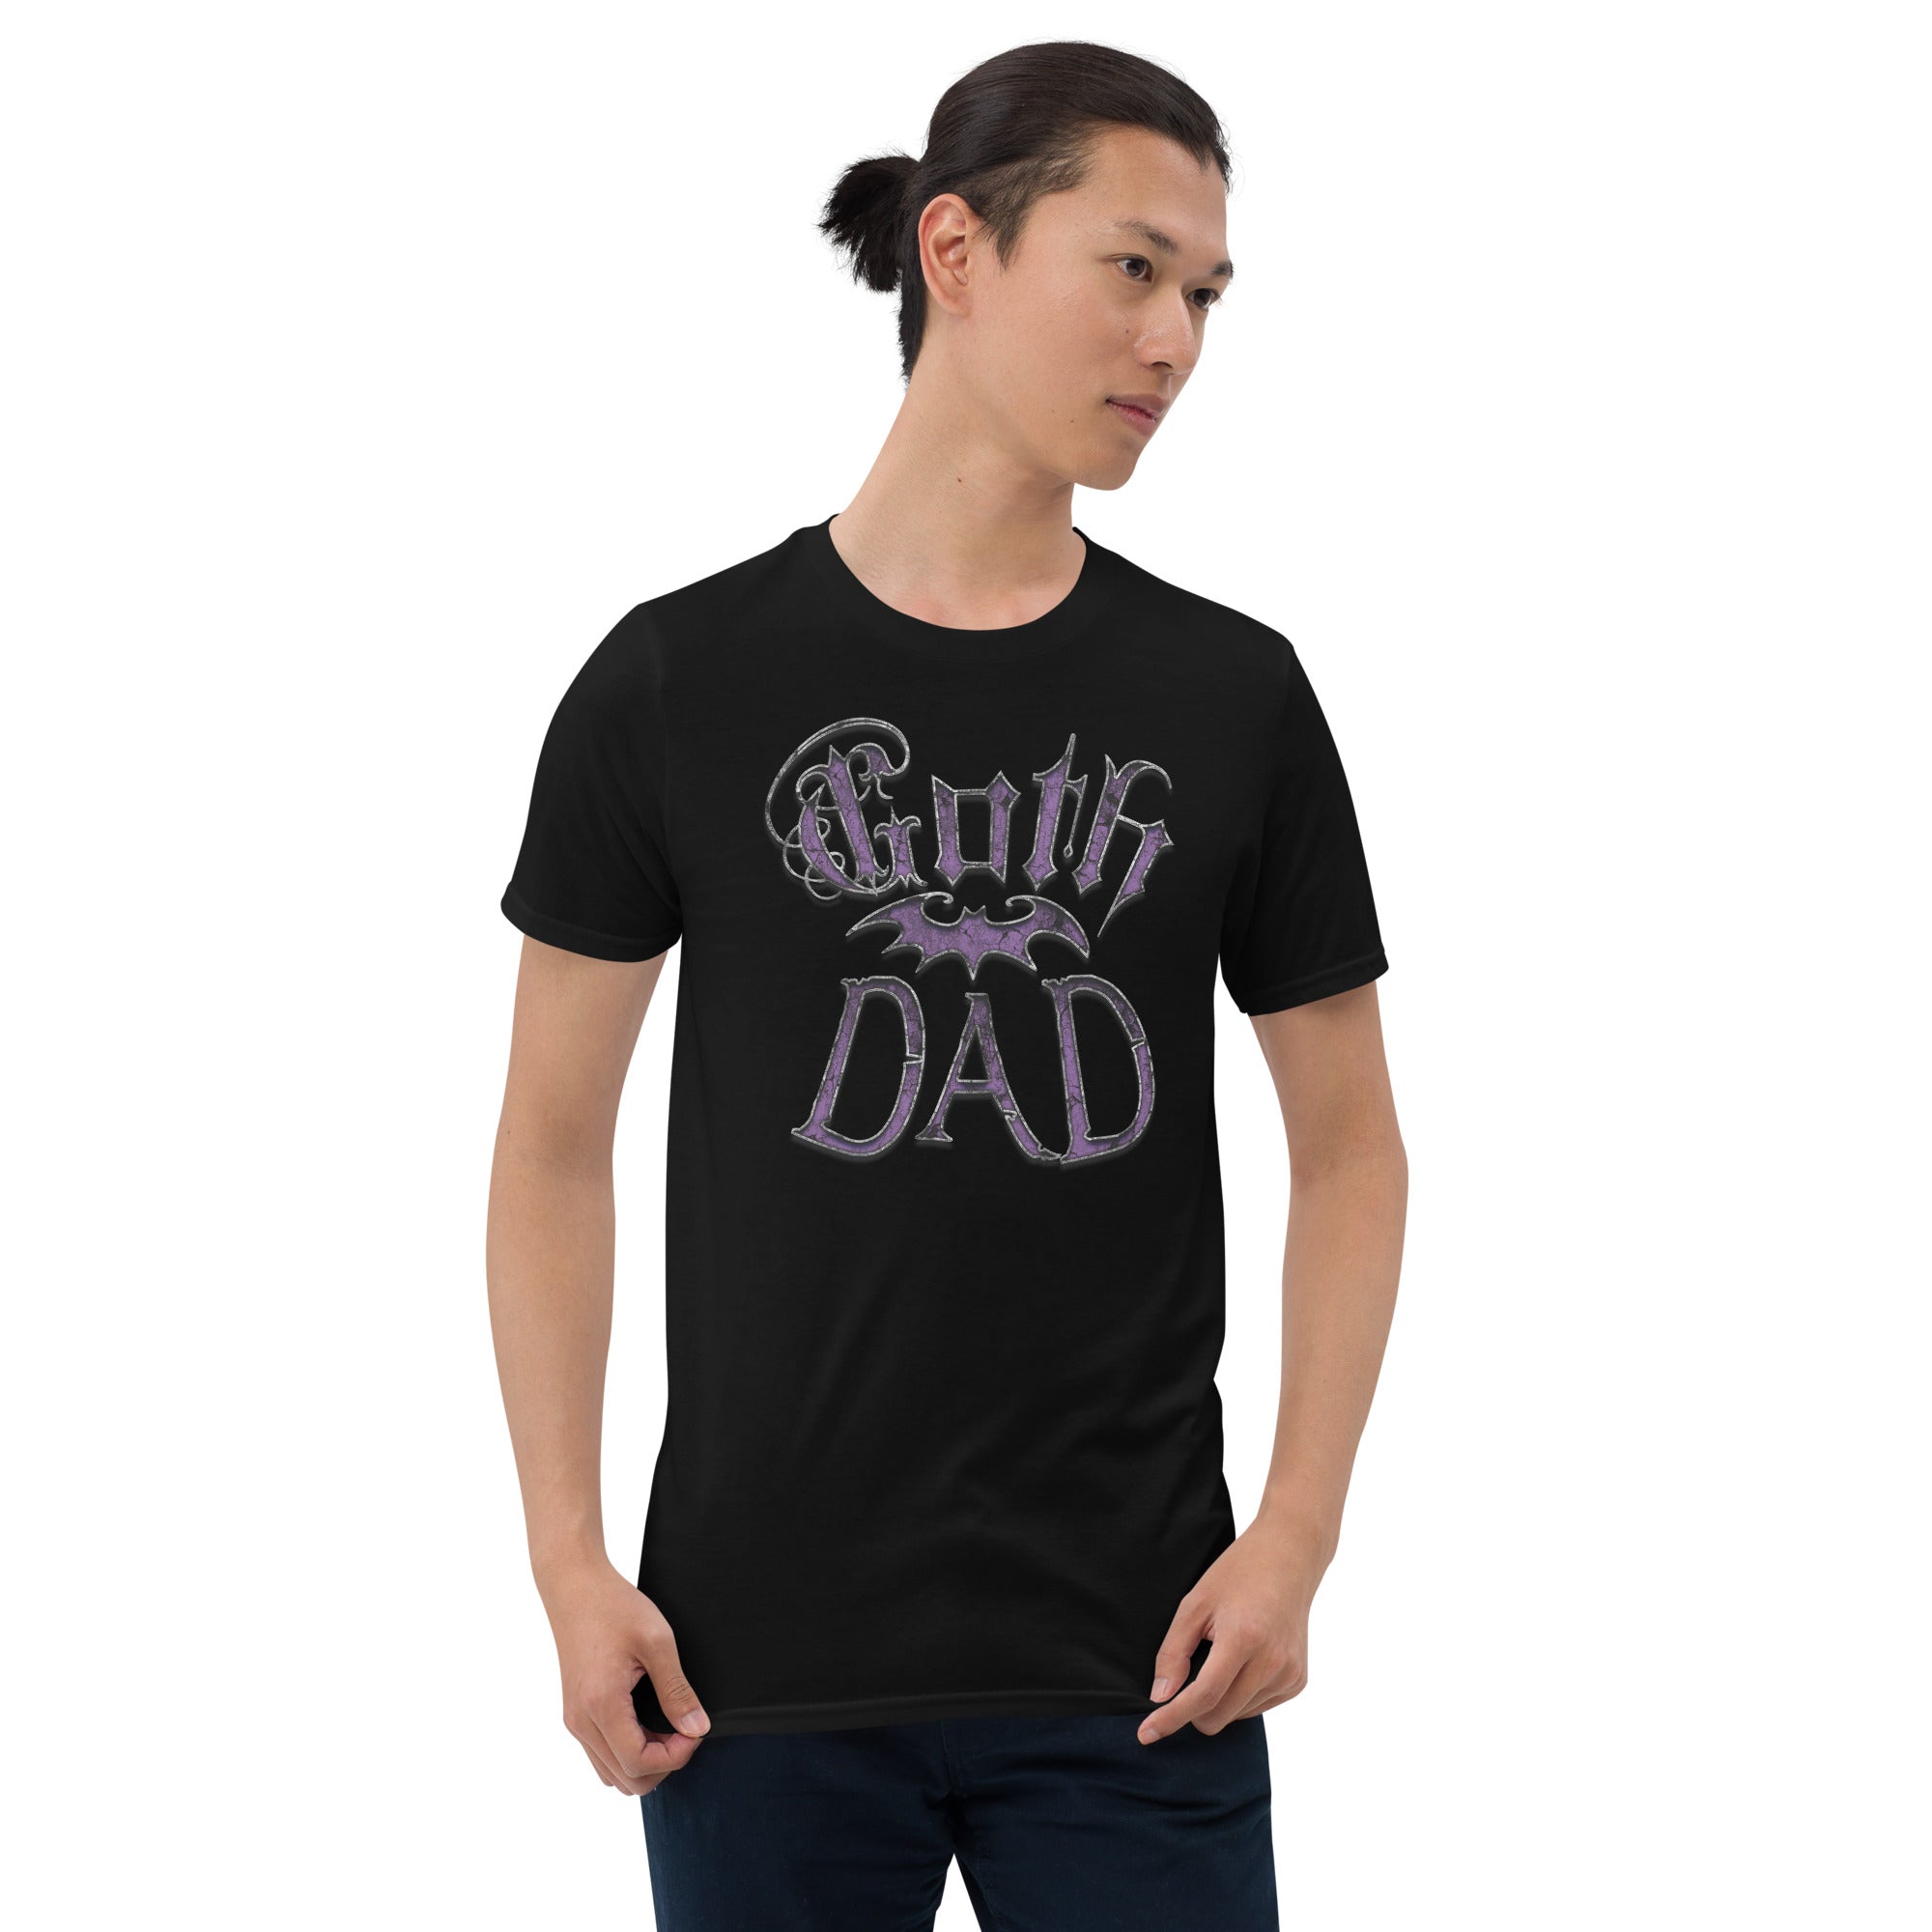 Purple Goth Dad with Bat Father's Day Gift Men’s Short Sleeve Shirt